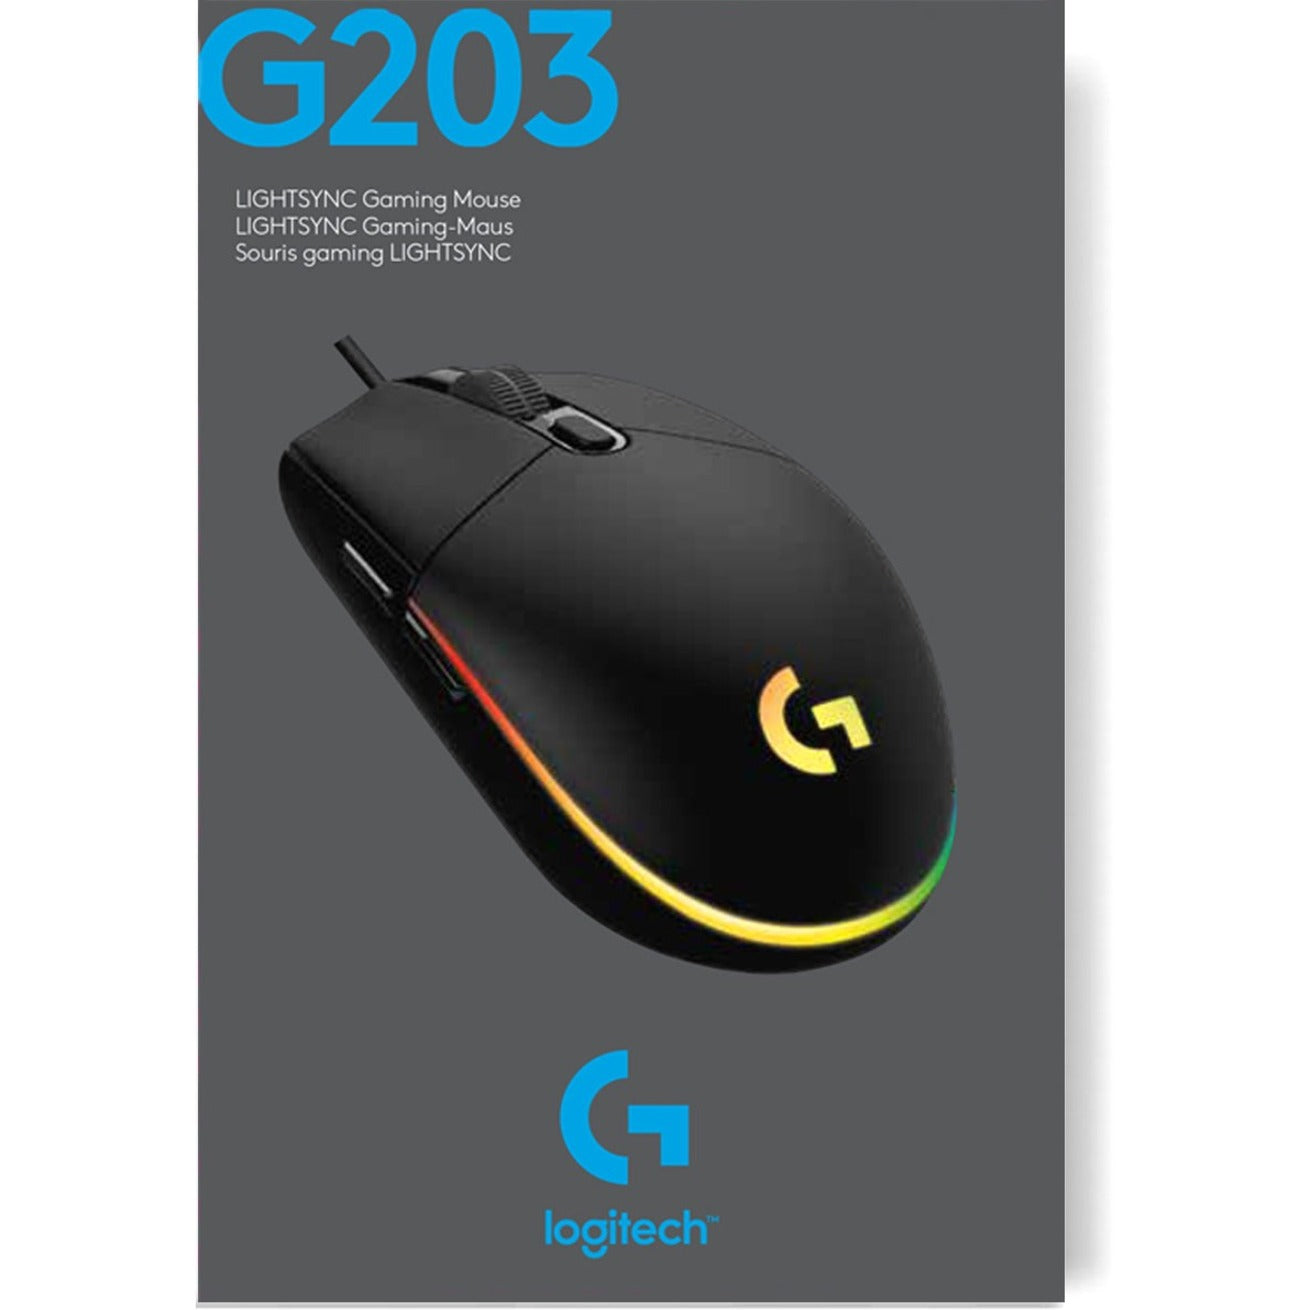 Logitech 910-005790 G203 Gaming Mouse, 6 Buttons, 8000 dpi, USB Wired, Black